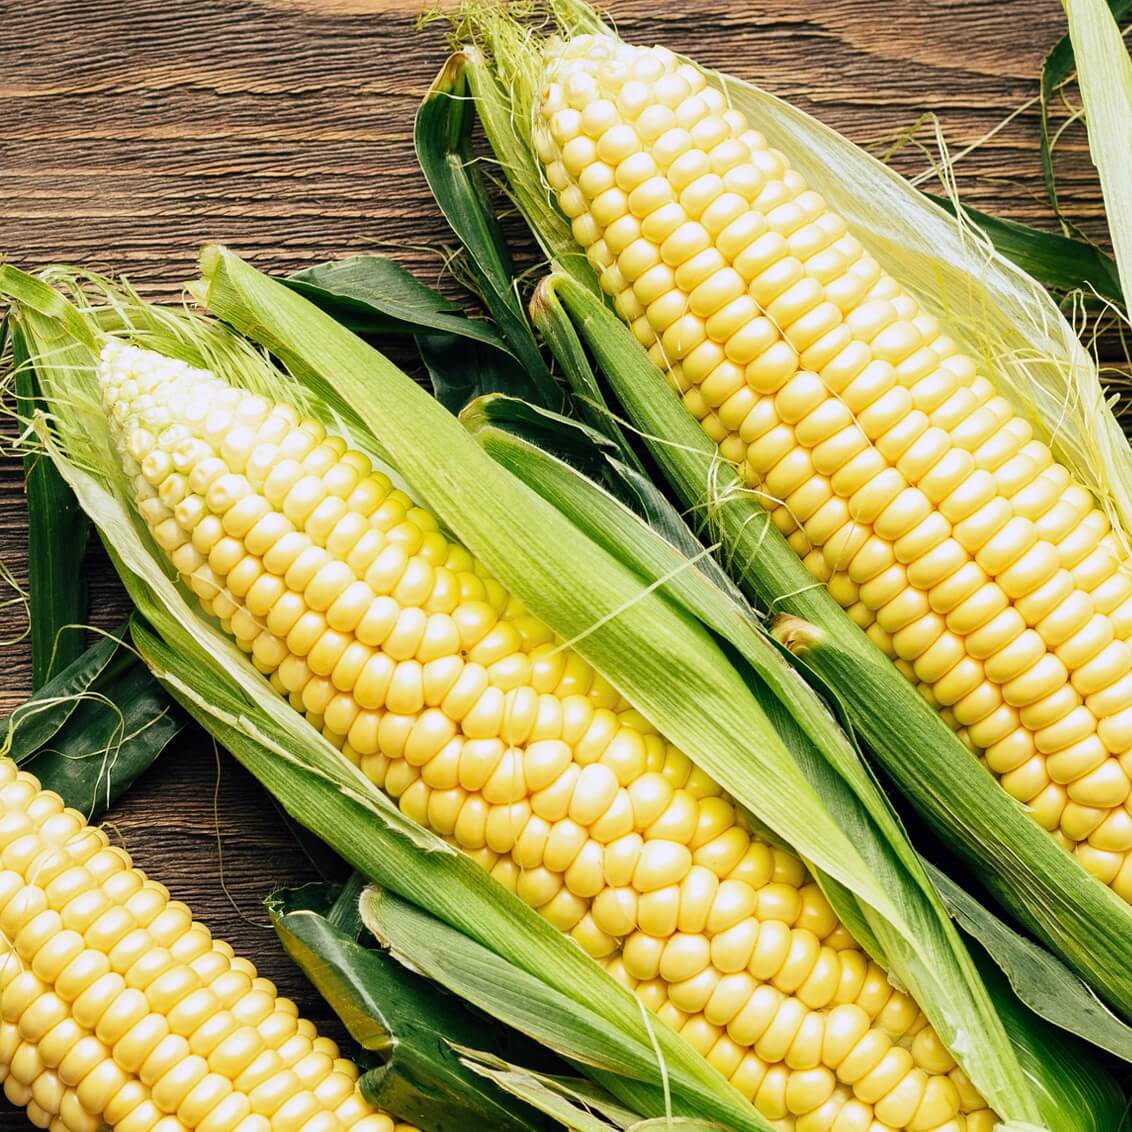 Buy Corn & Vegetables in Singapore - The New Grocer